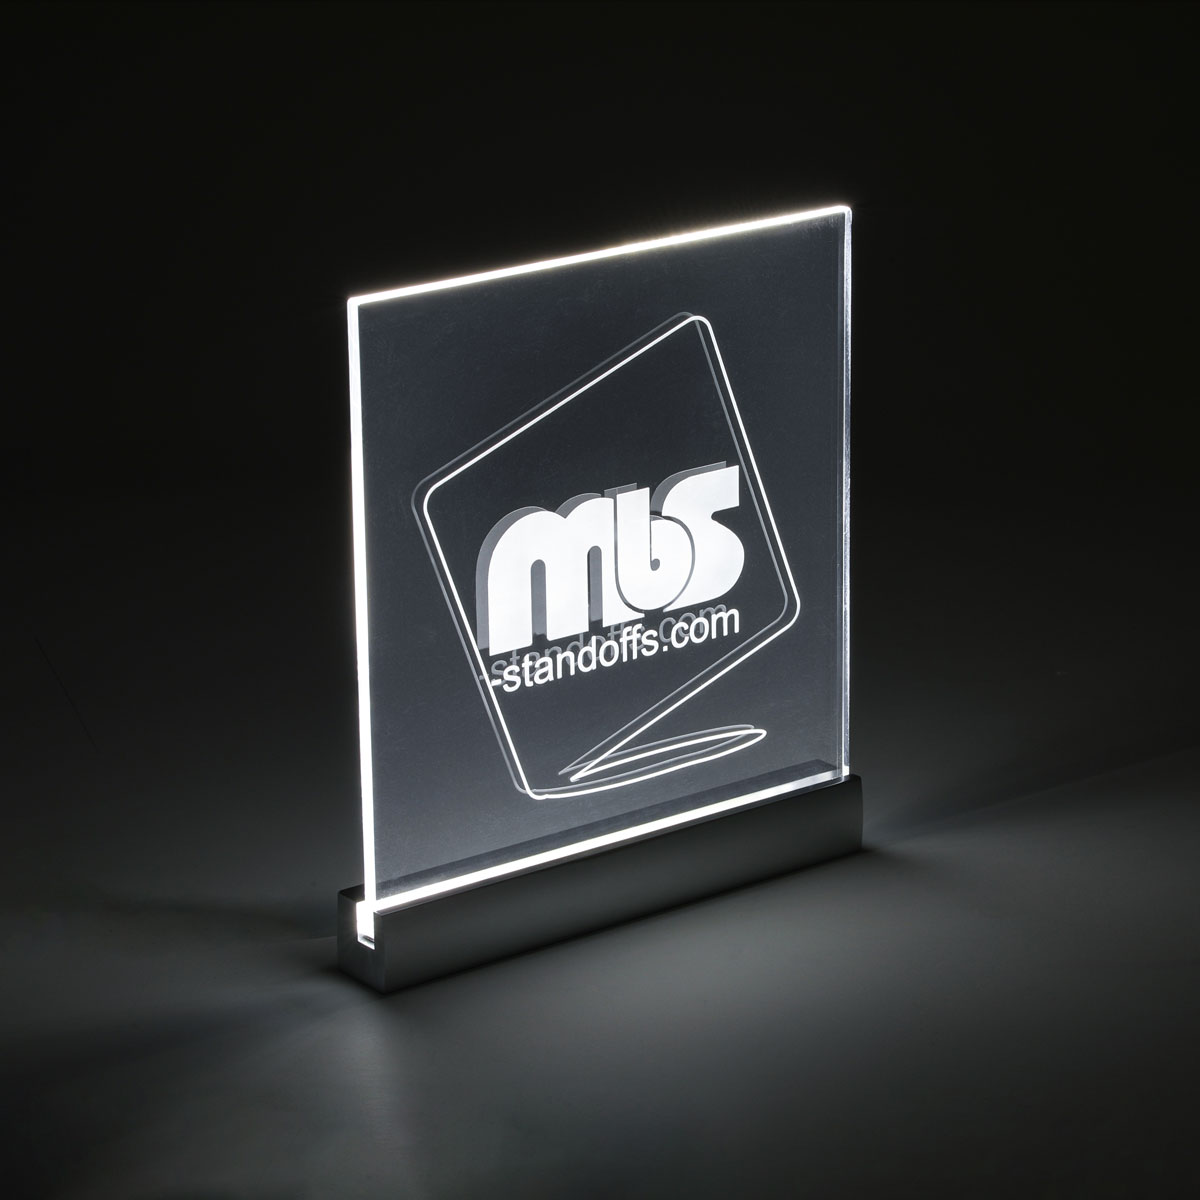 WHITE LED Sign Clamp in 4 3/4'' (120 mm) length X 1'' (25.4 mm) Silver satin aluminum finish.Mount Kit Supports Signs Up To 5/16'' Thick, Wall Mount, Low Voltage transformer included.